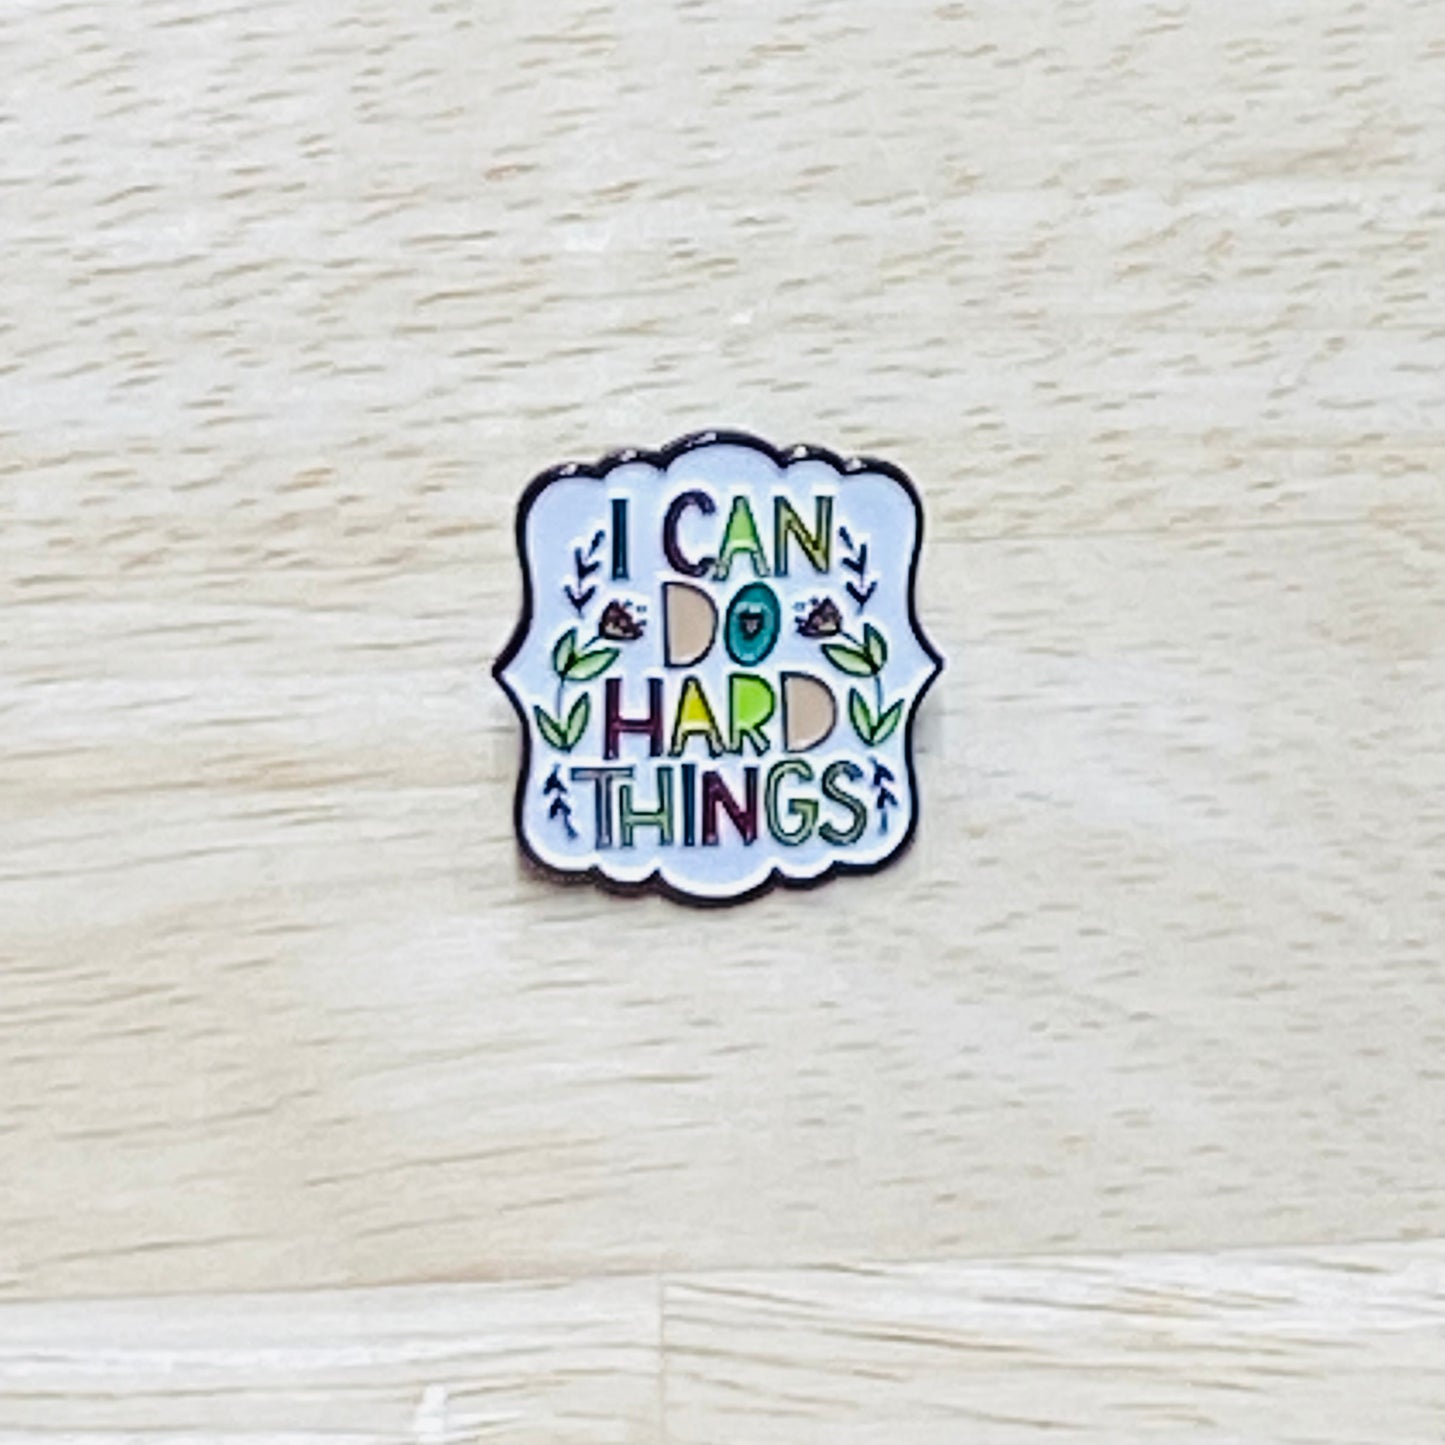 Inspirational Pins - I Can Do Hard Things